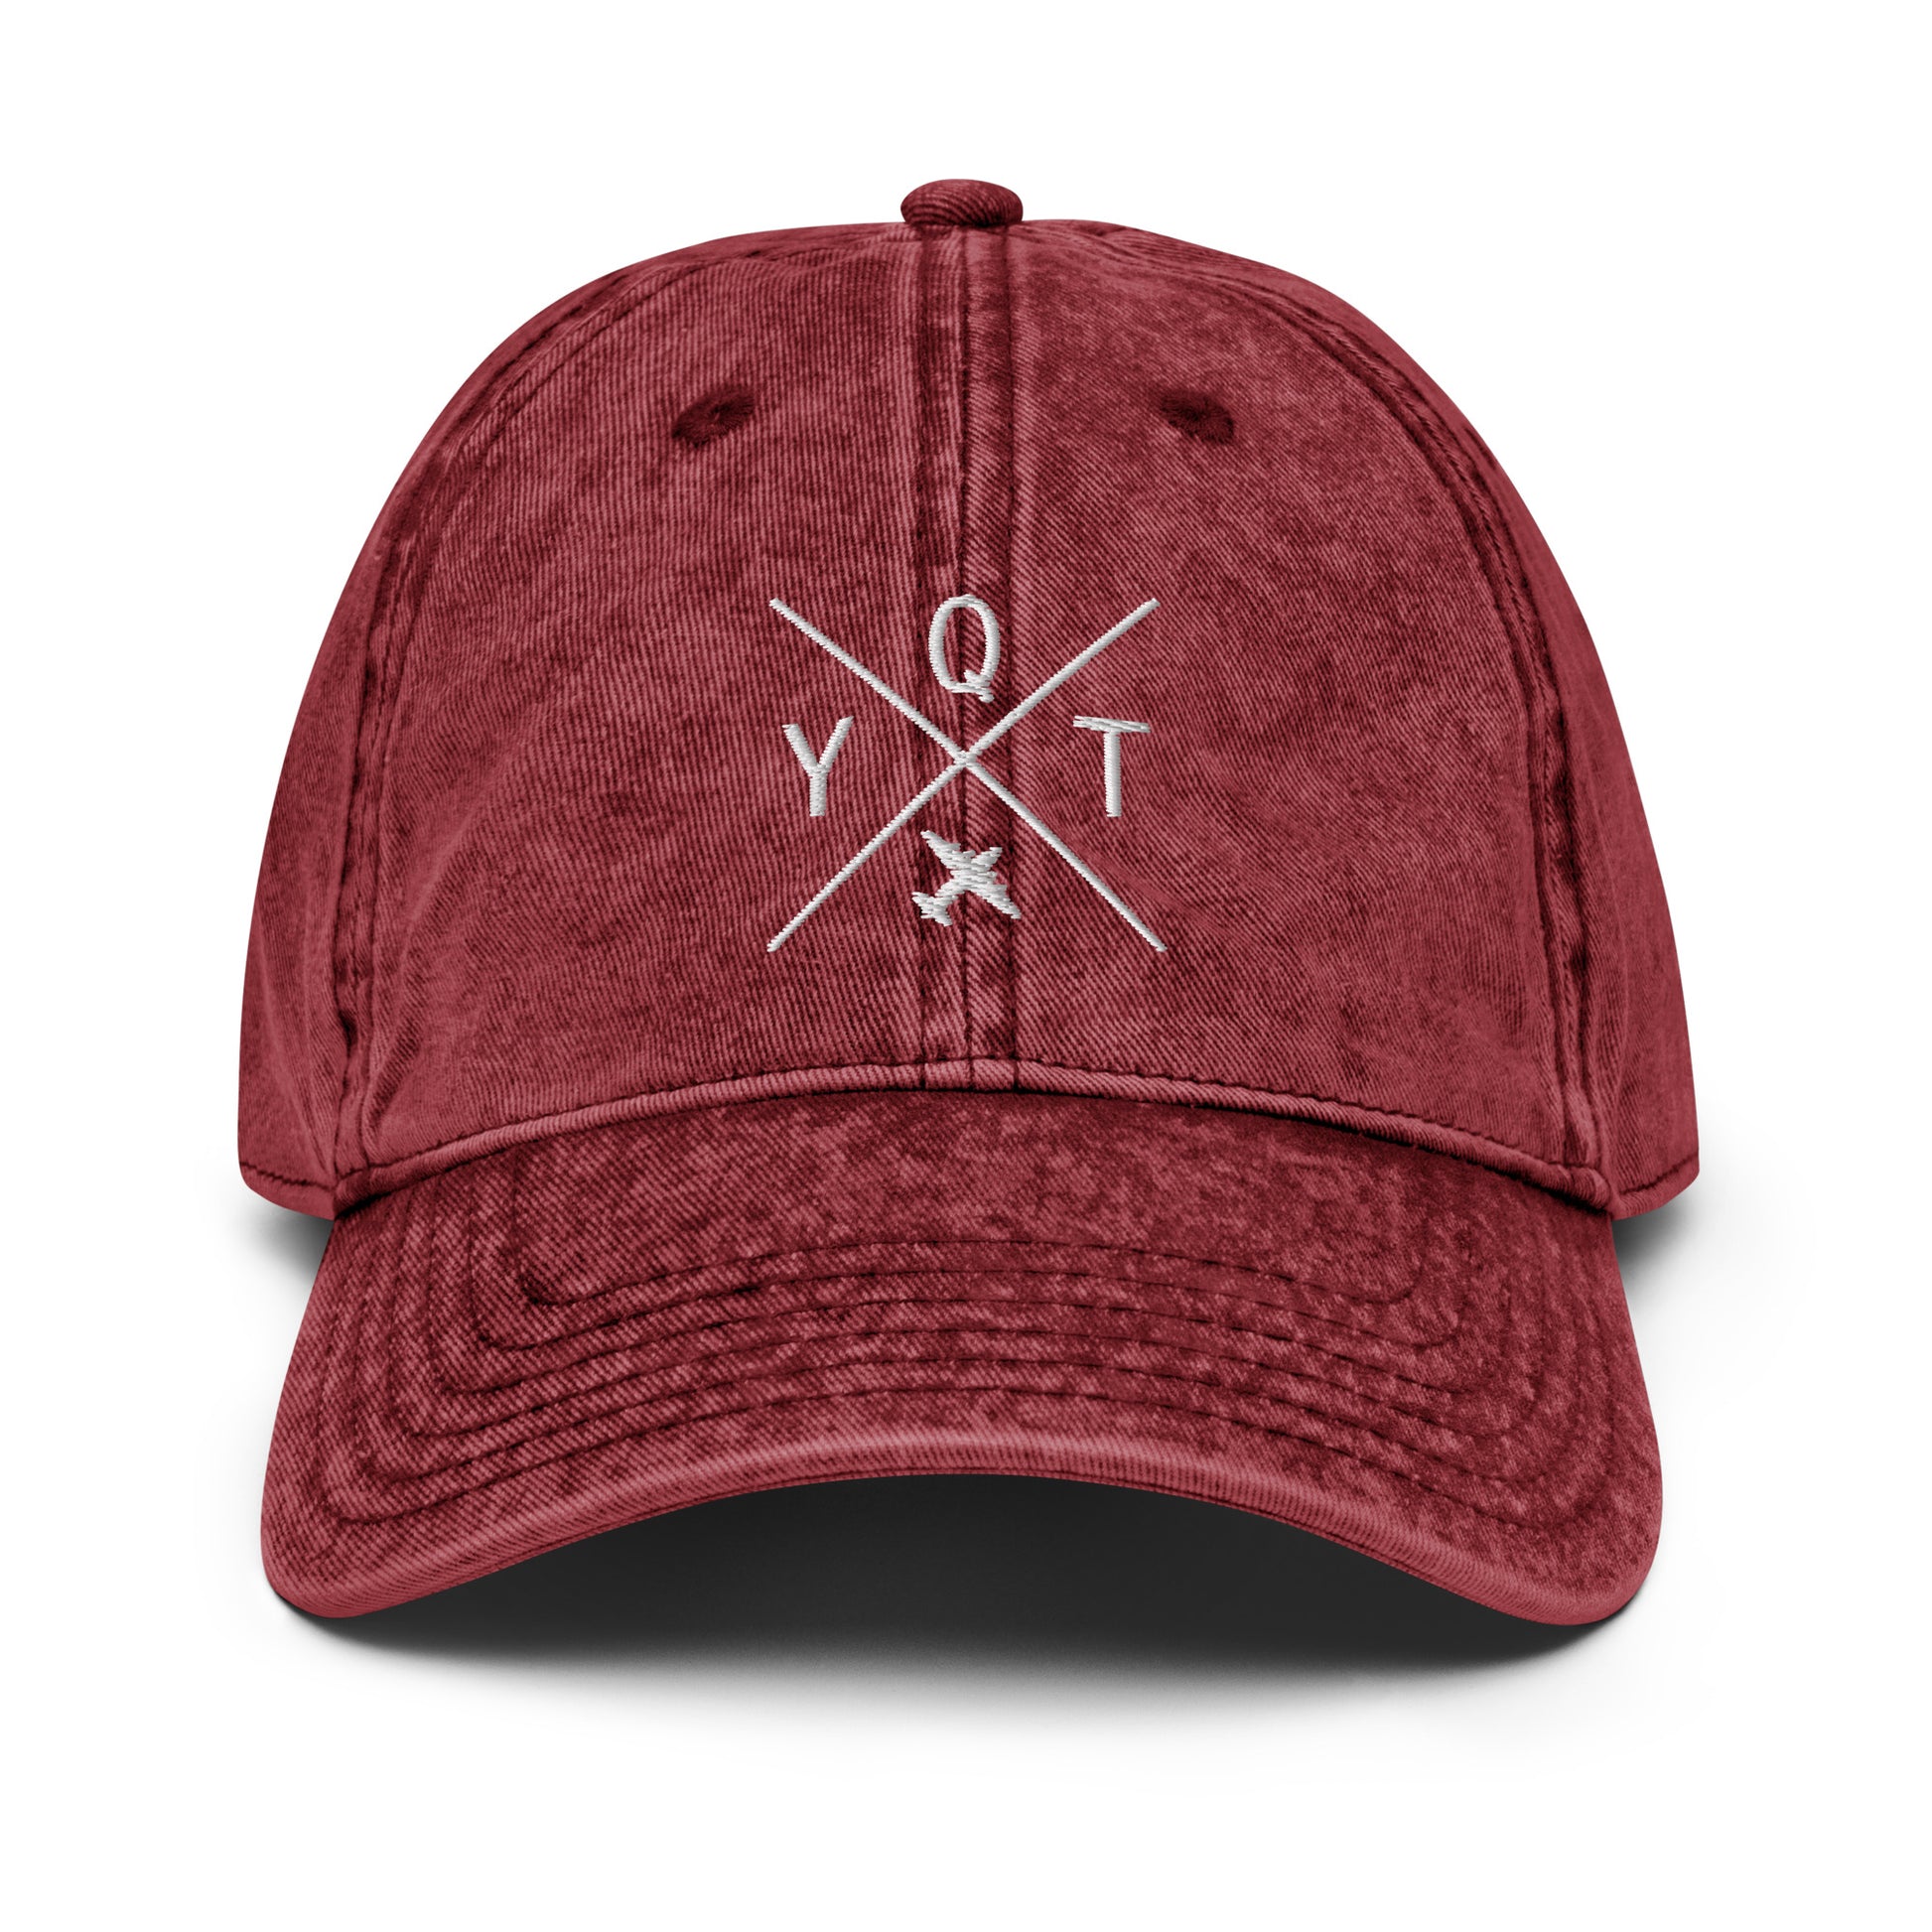 Crossed-X Cotton Twill Cap - White • YQT Thunder Bay • YHM Designs - Image 22